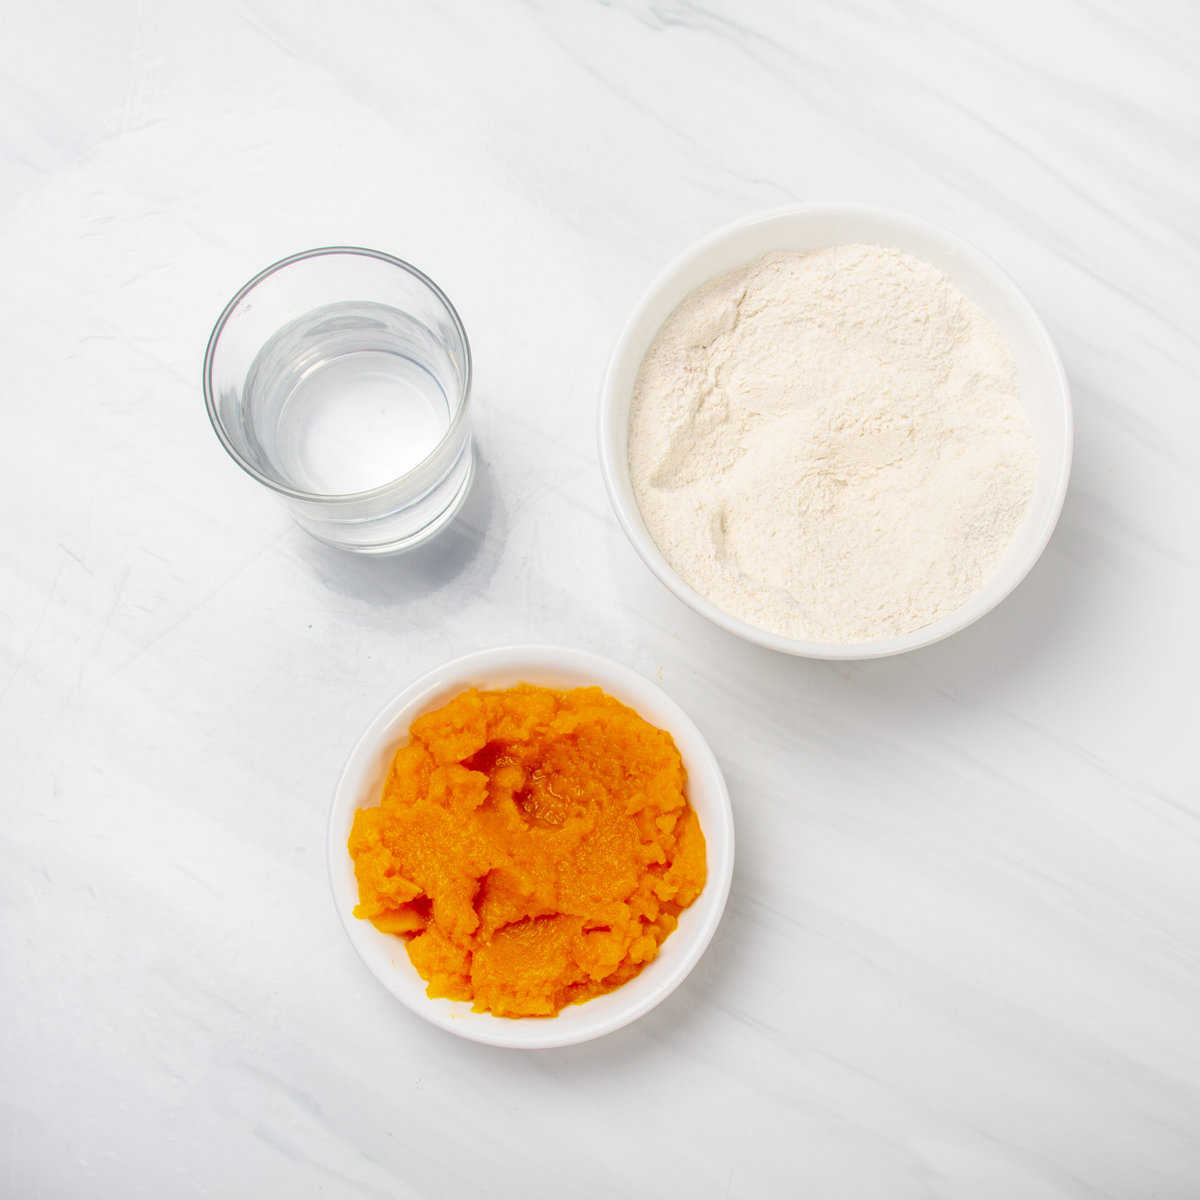 Pumpkin cake mix, pumpkin puree, and water in separate dishes. 